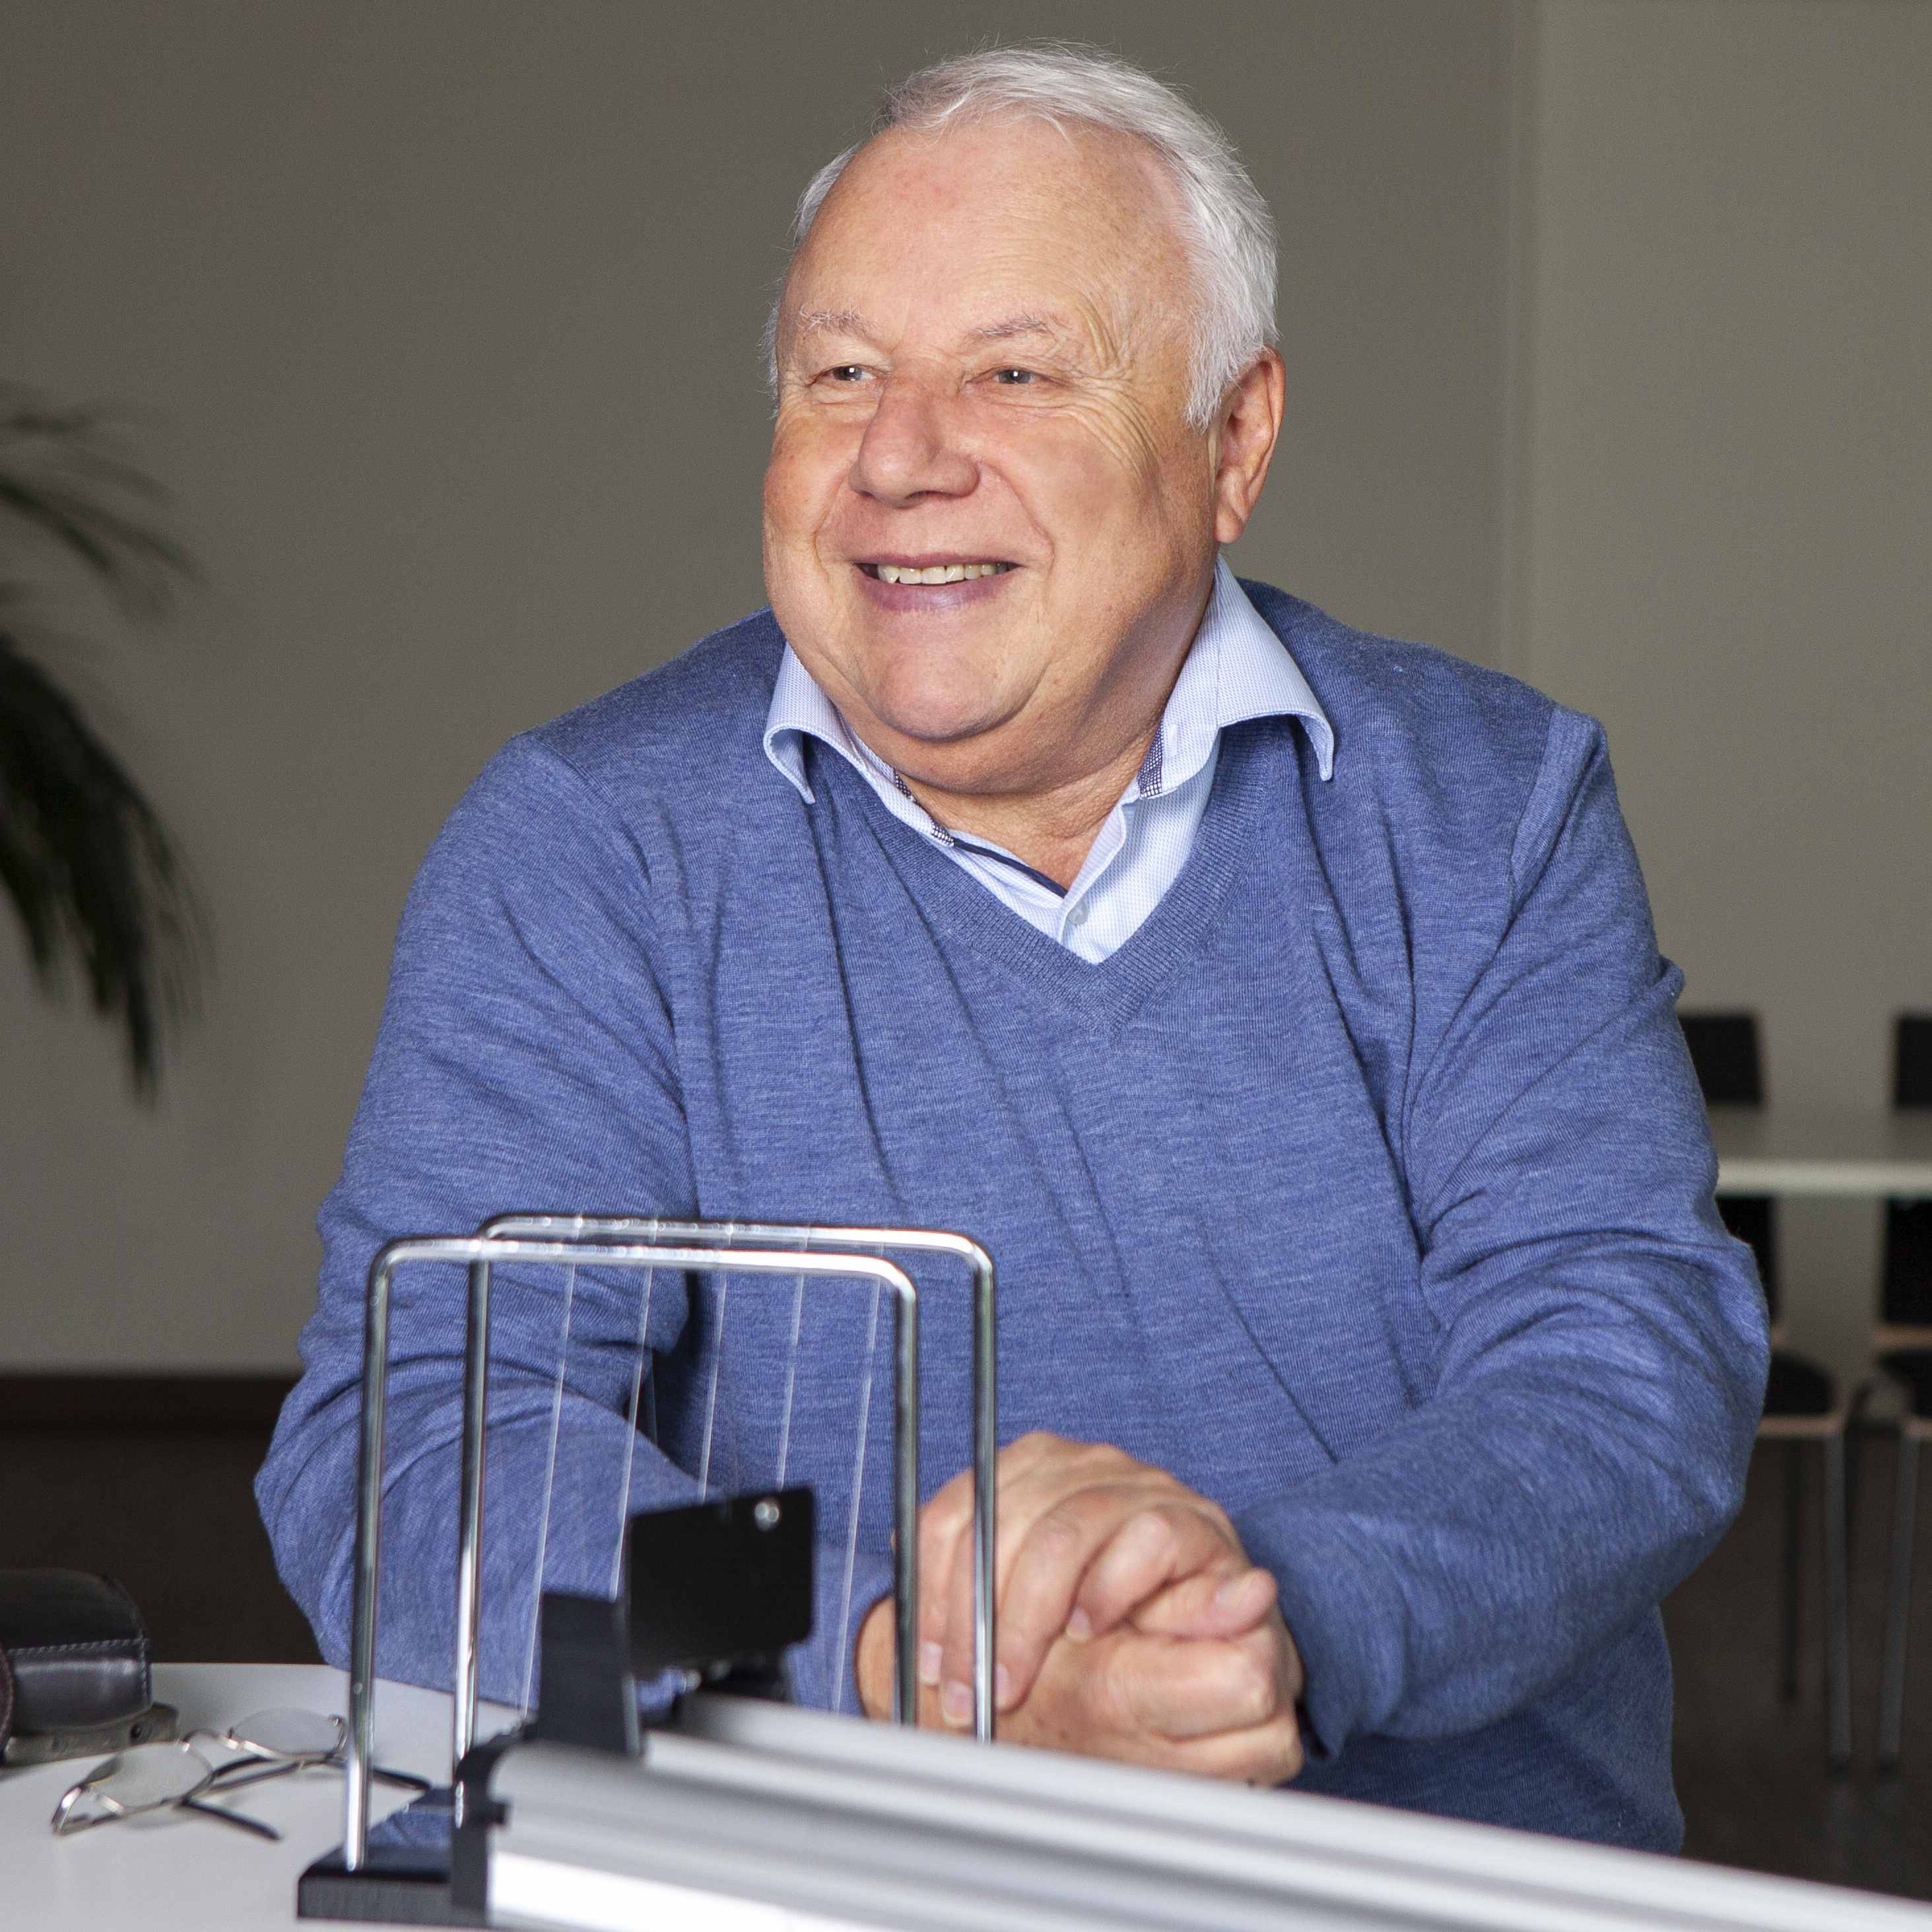 Dr. Josef Rosenzweig has been working at Fraunhofer IAF for many years.